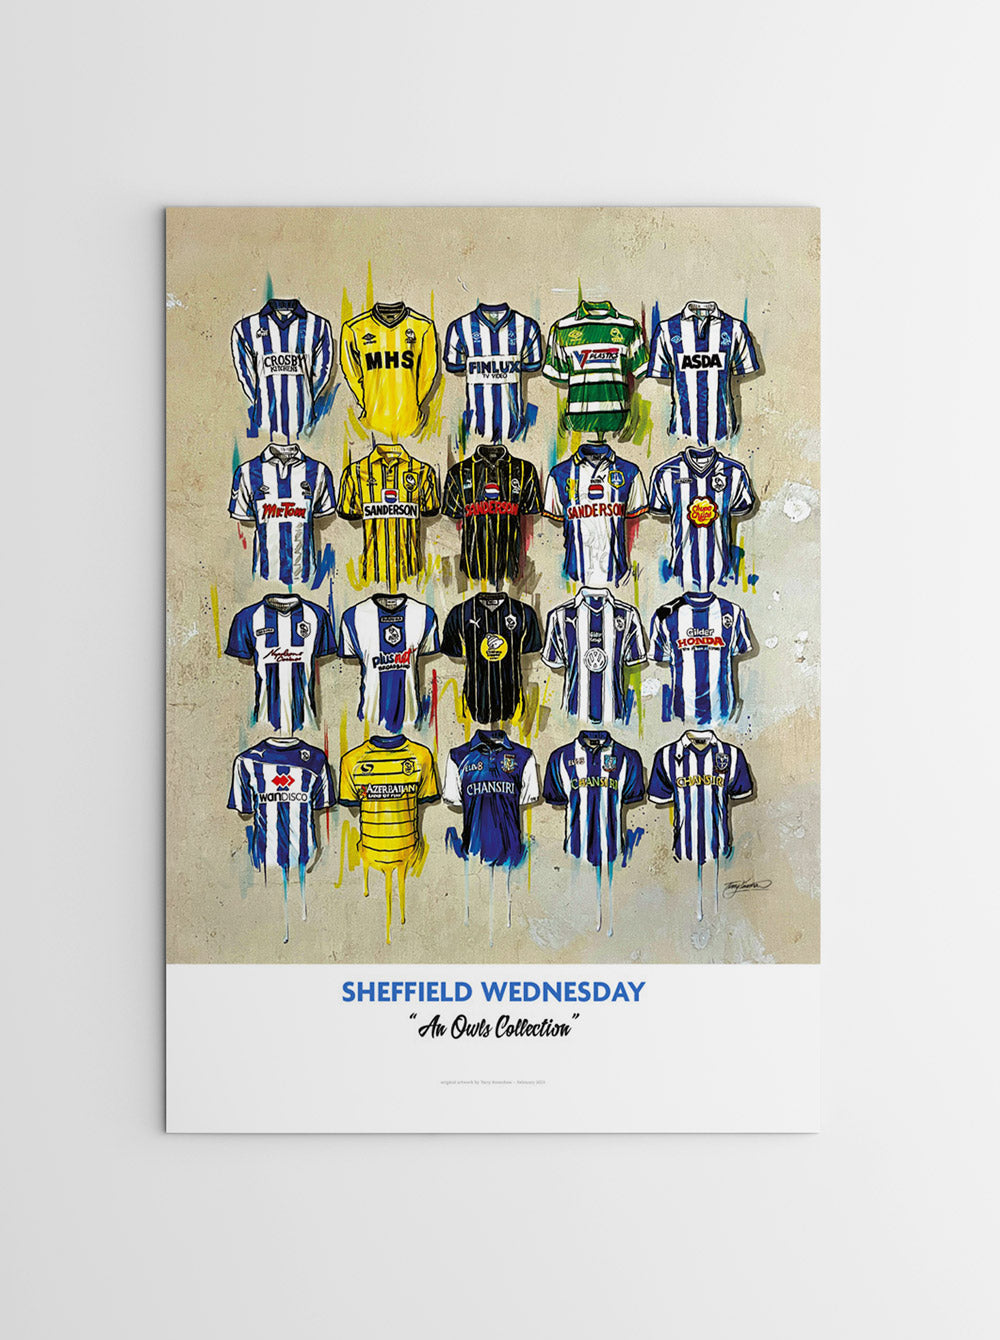 This personalised A2 limited edition print artwork by Terry Kneeshaw features 20 iconic Sheffield Wednesday team shirts. The print showcases the team's historical evolution, displaying a range of classic and modern shirts that reflect the club's journey over time. Each jersey is uniquely personalised with the name and number of a chosen player. The artwork makes for a great addition to any Sheffield Wednesday fan's collection, providing a visual journey through the club's rich history.